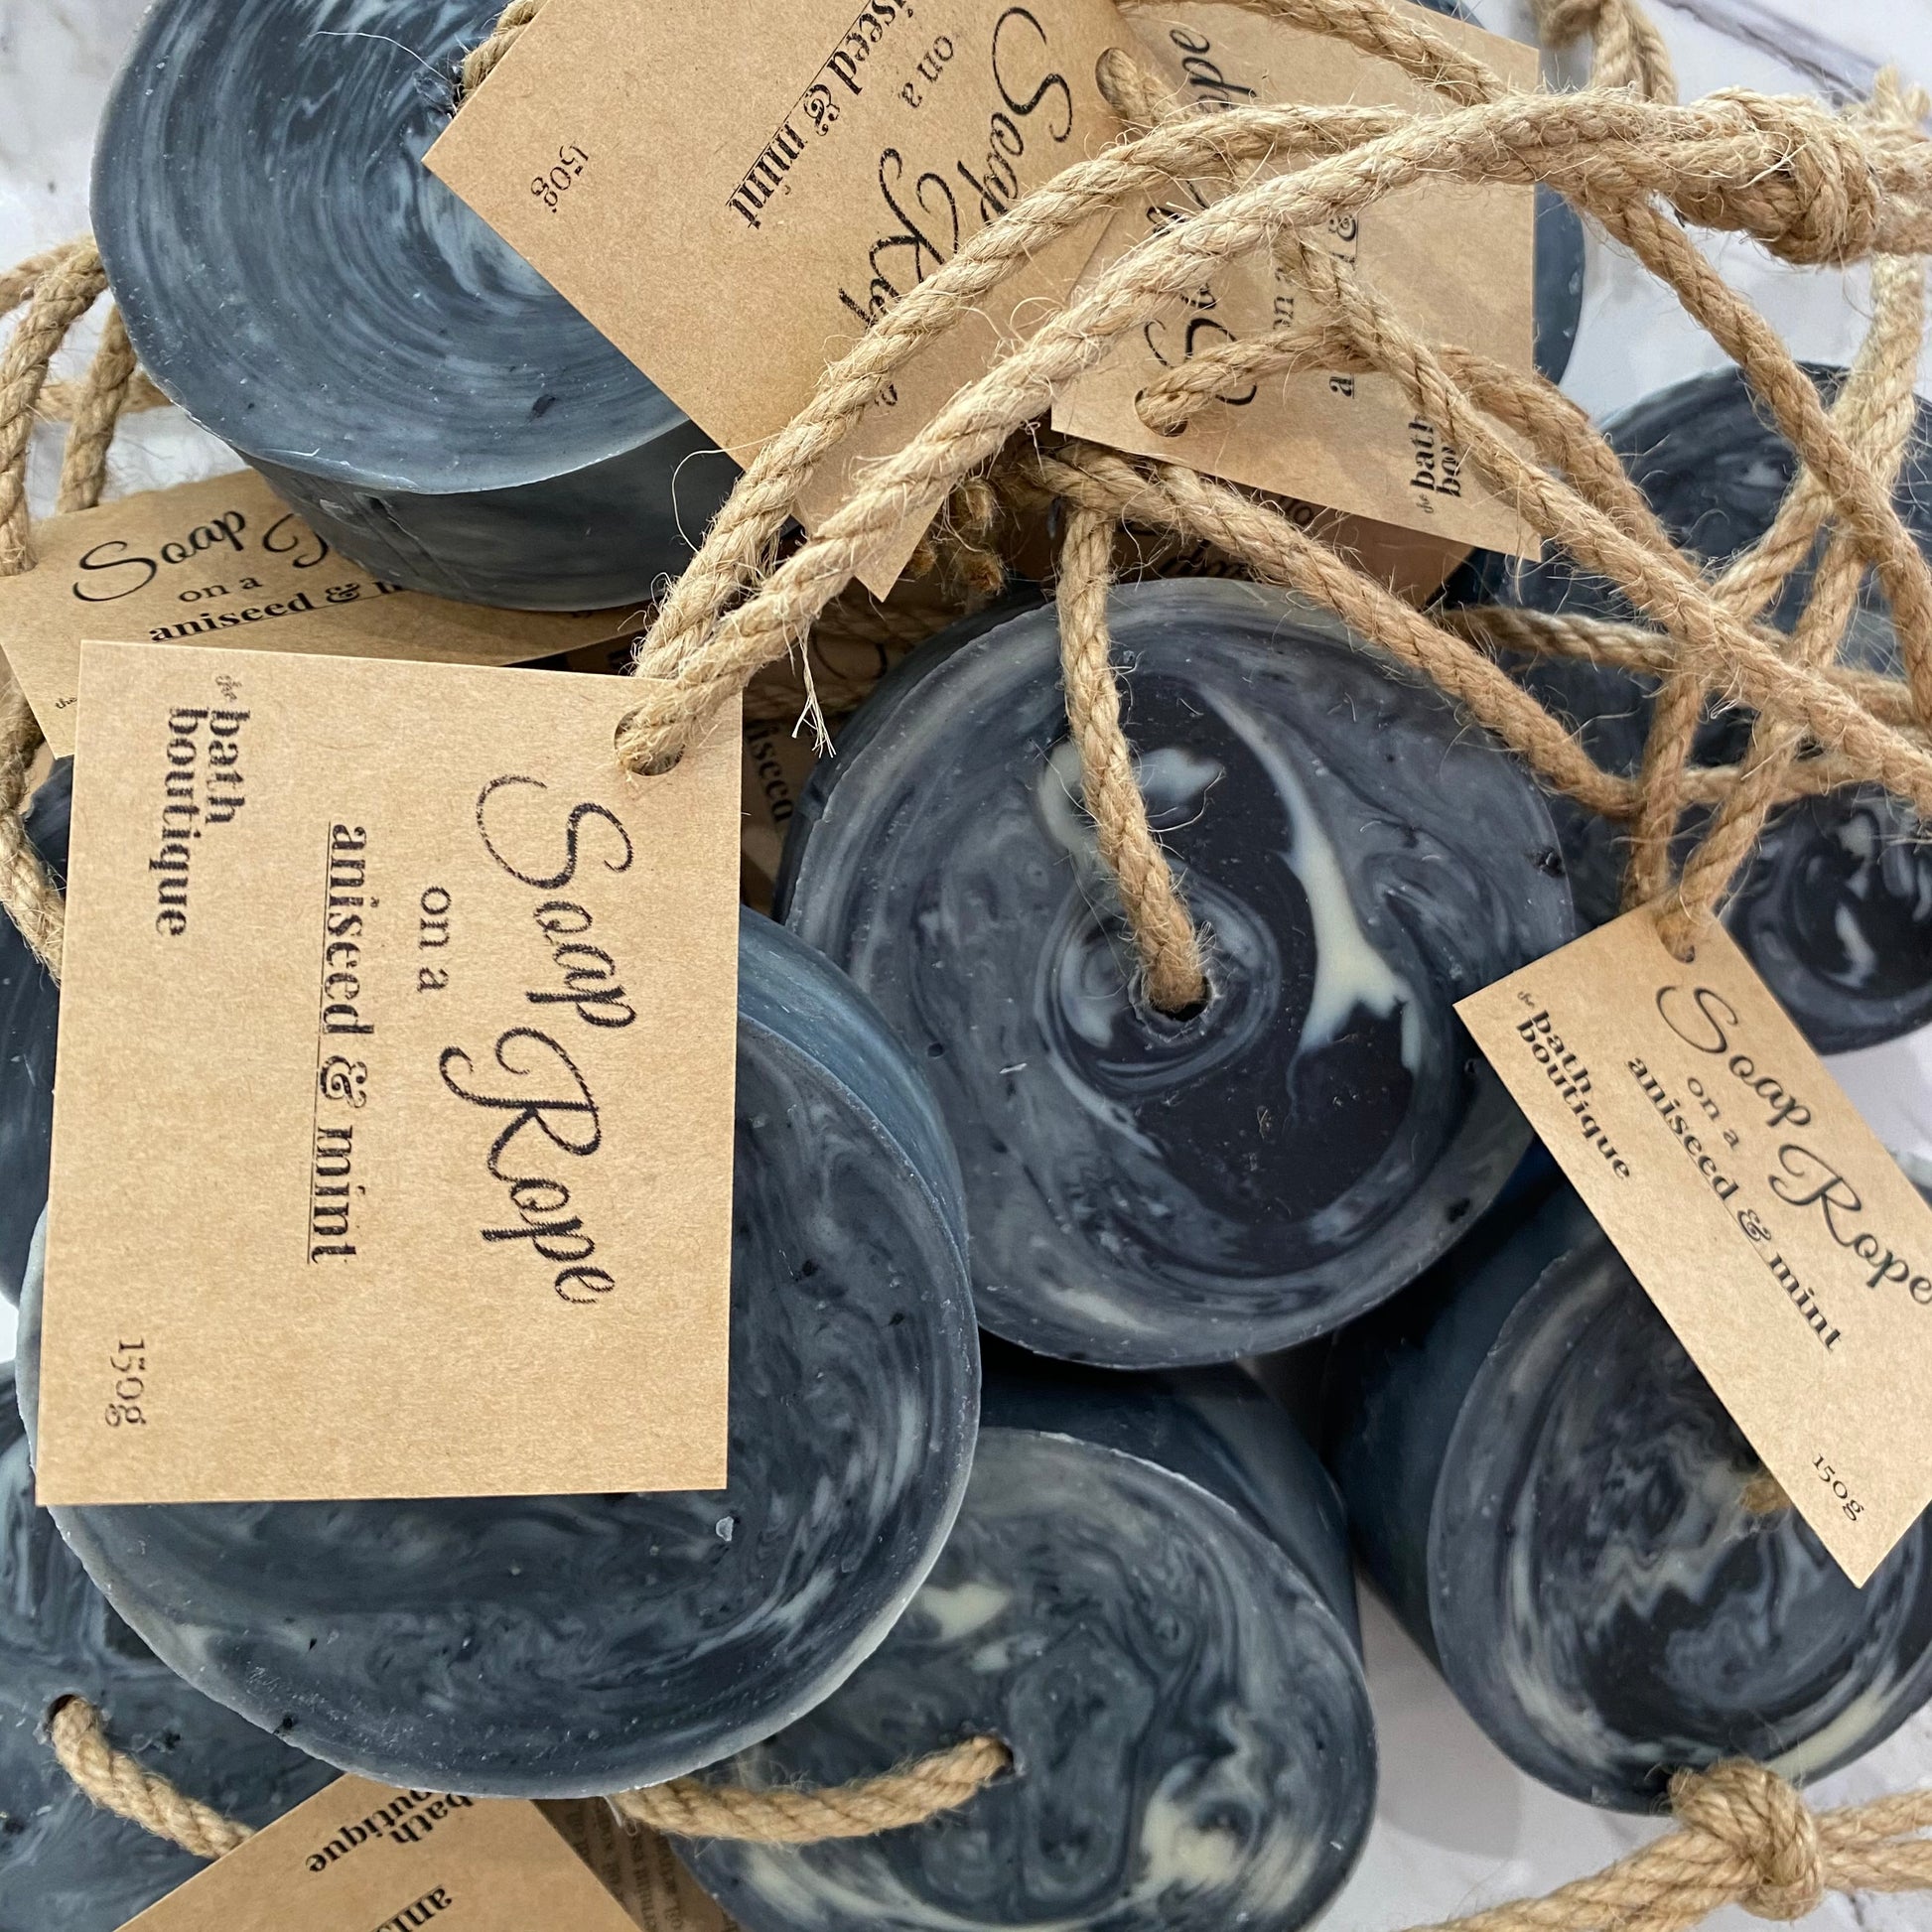 aniseed and mint Scented Soap On A Rope Scented round circle Soap Bar black and white activated charcoal soap handmade and vegan friendly Melbourne Australia